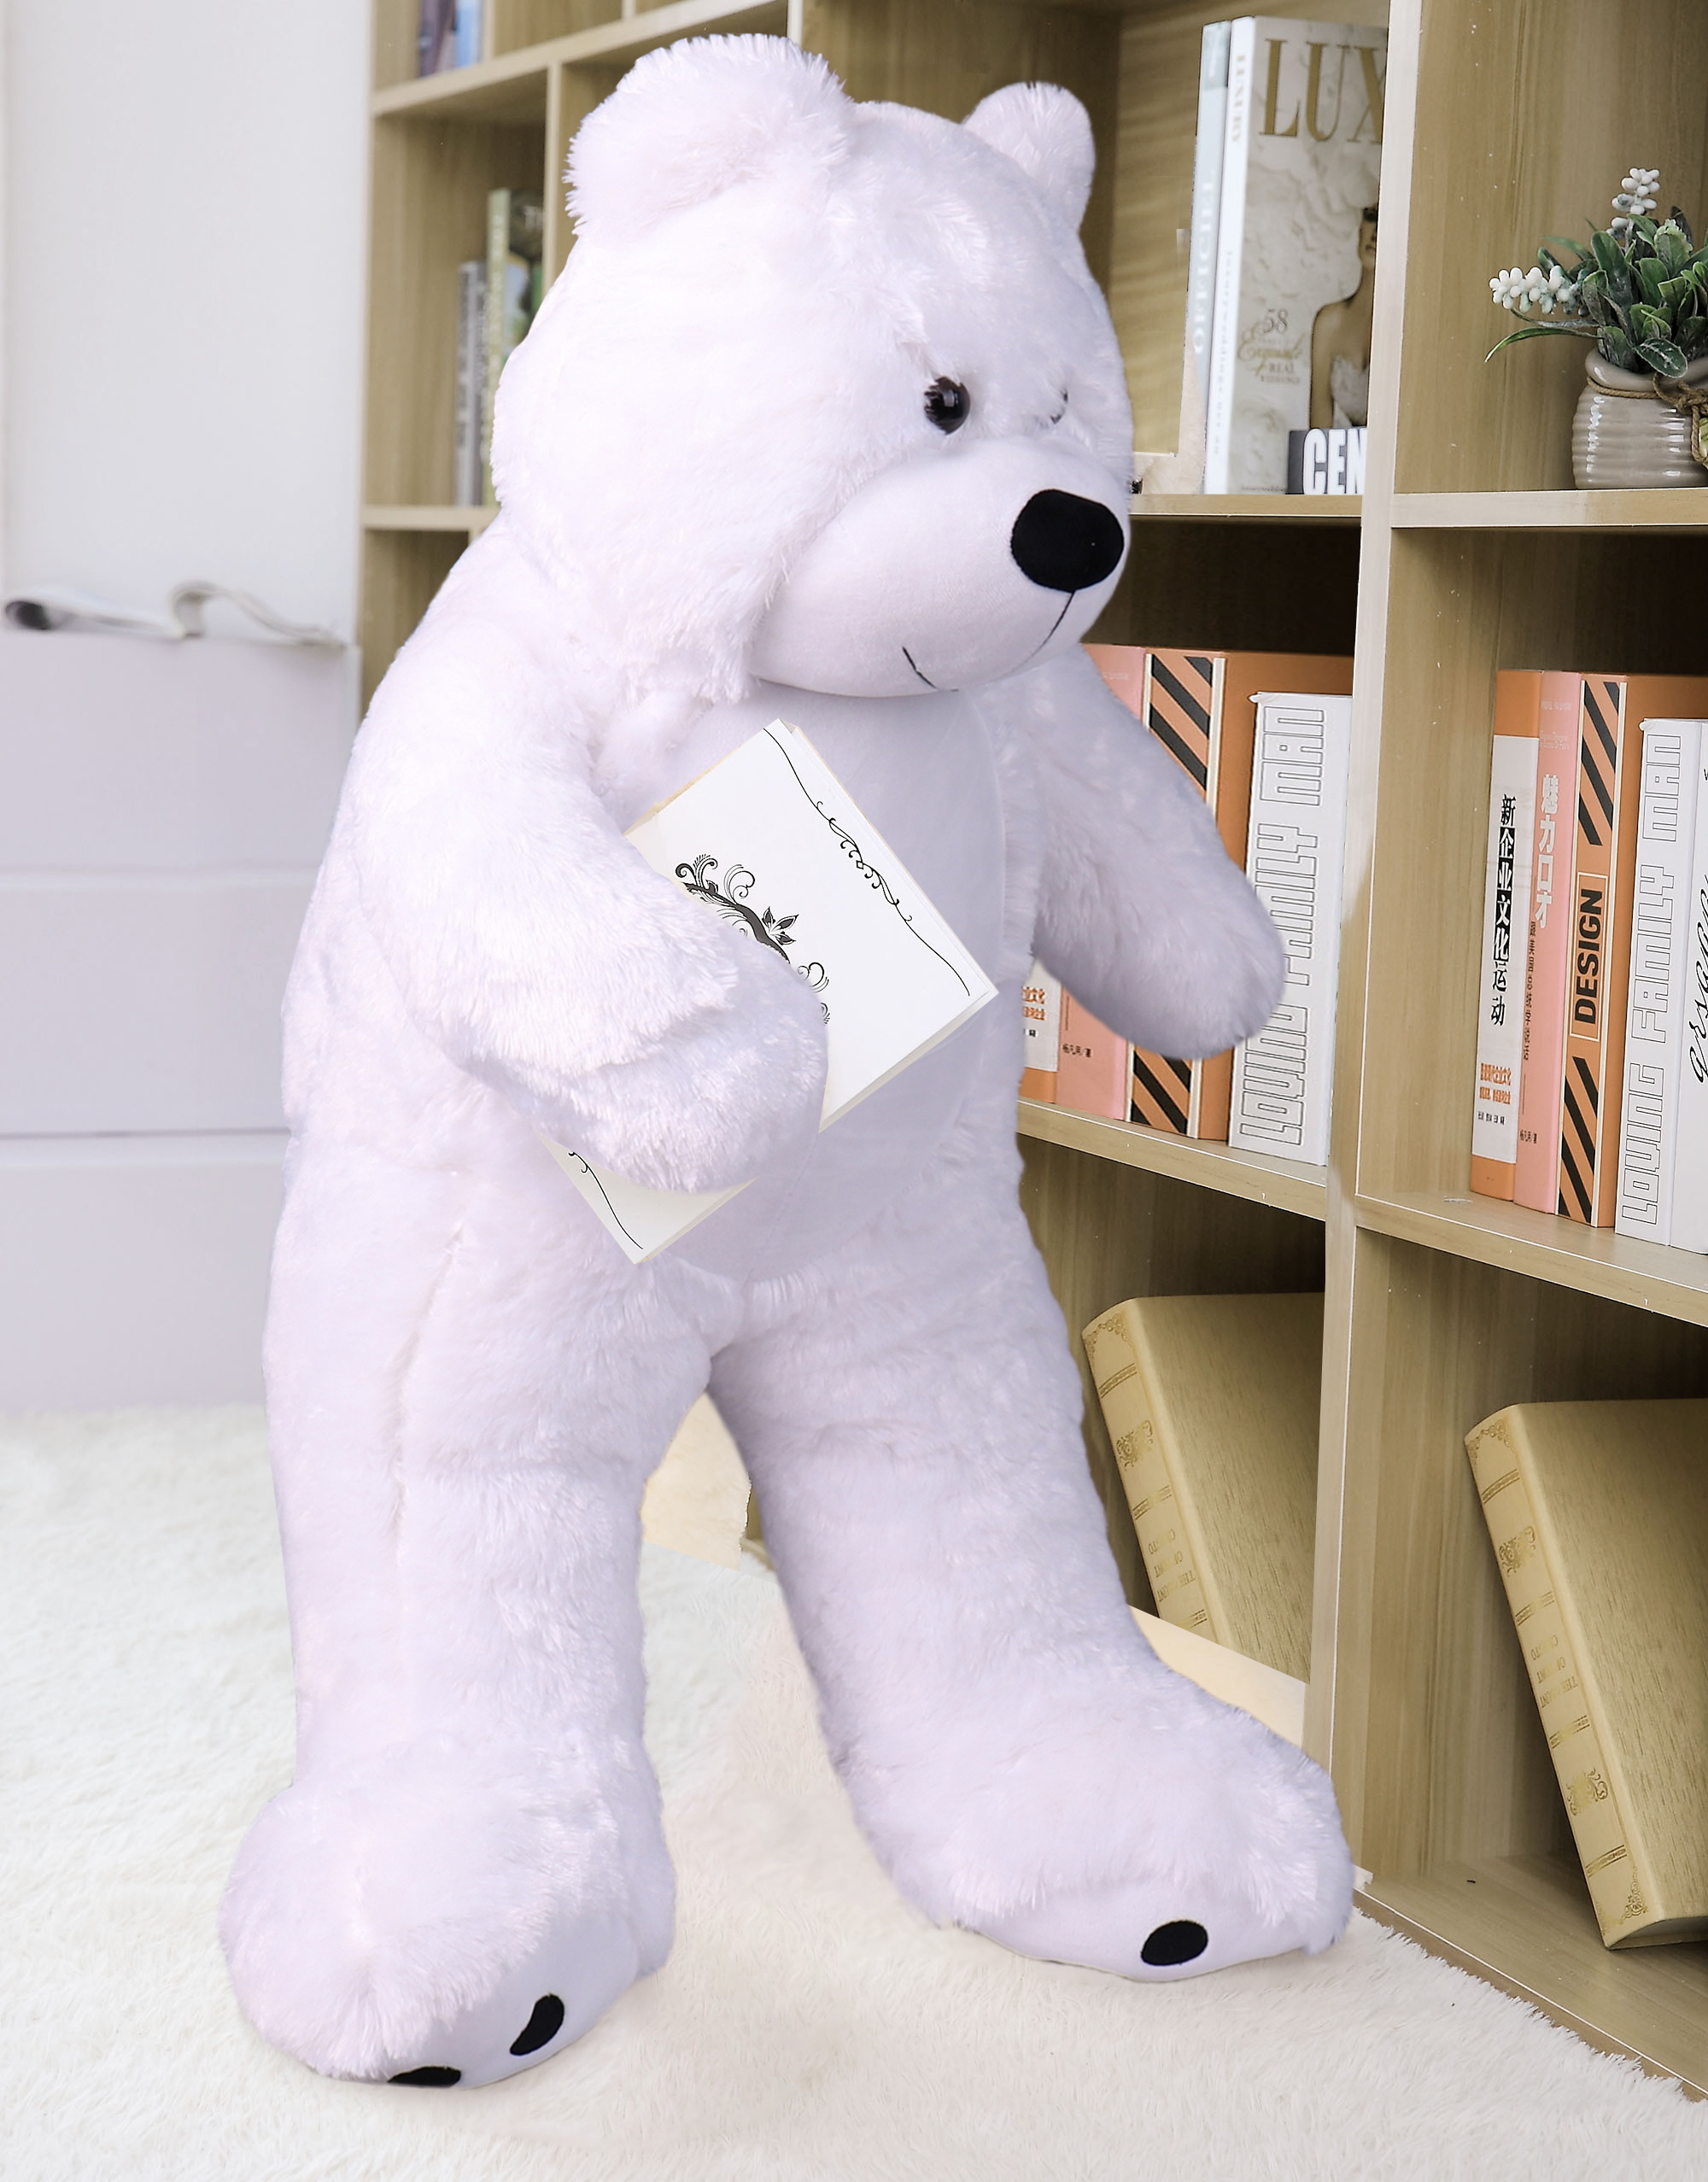 WOWMAX 3 Foot Giant Teddy Bear Daney Cuddly Stuffed Plush Animals Teddy Bear Toy Doll for Birthday Christmas White 36 Inches - image 5 of 5